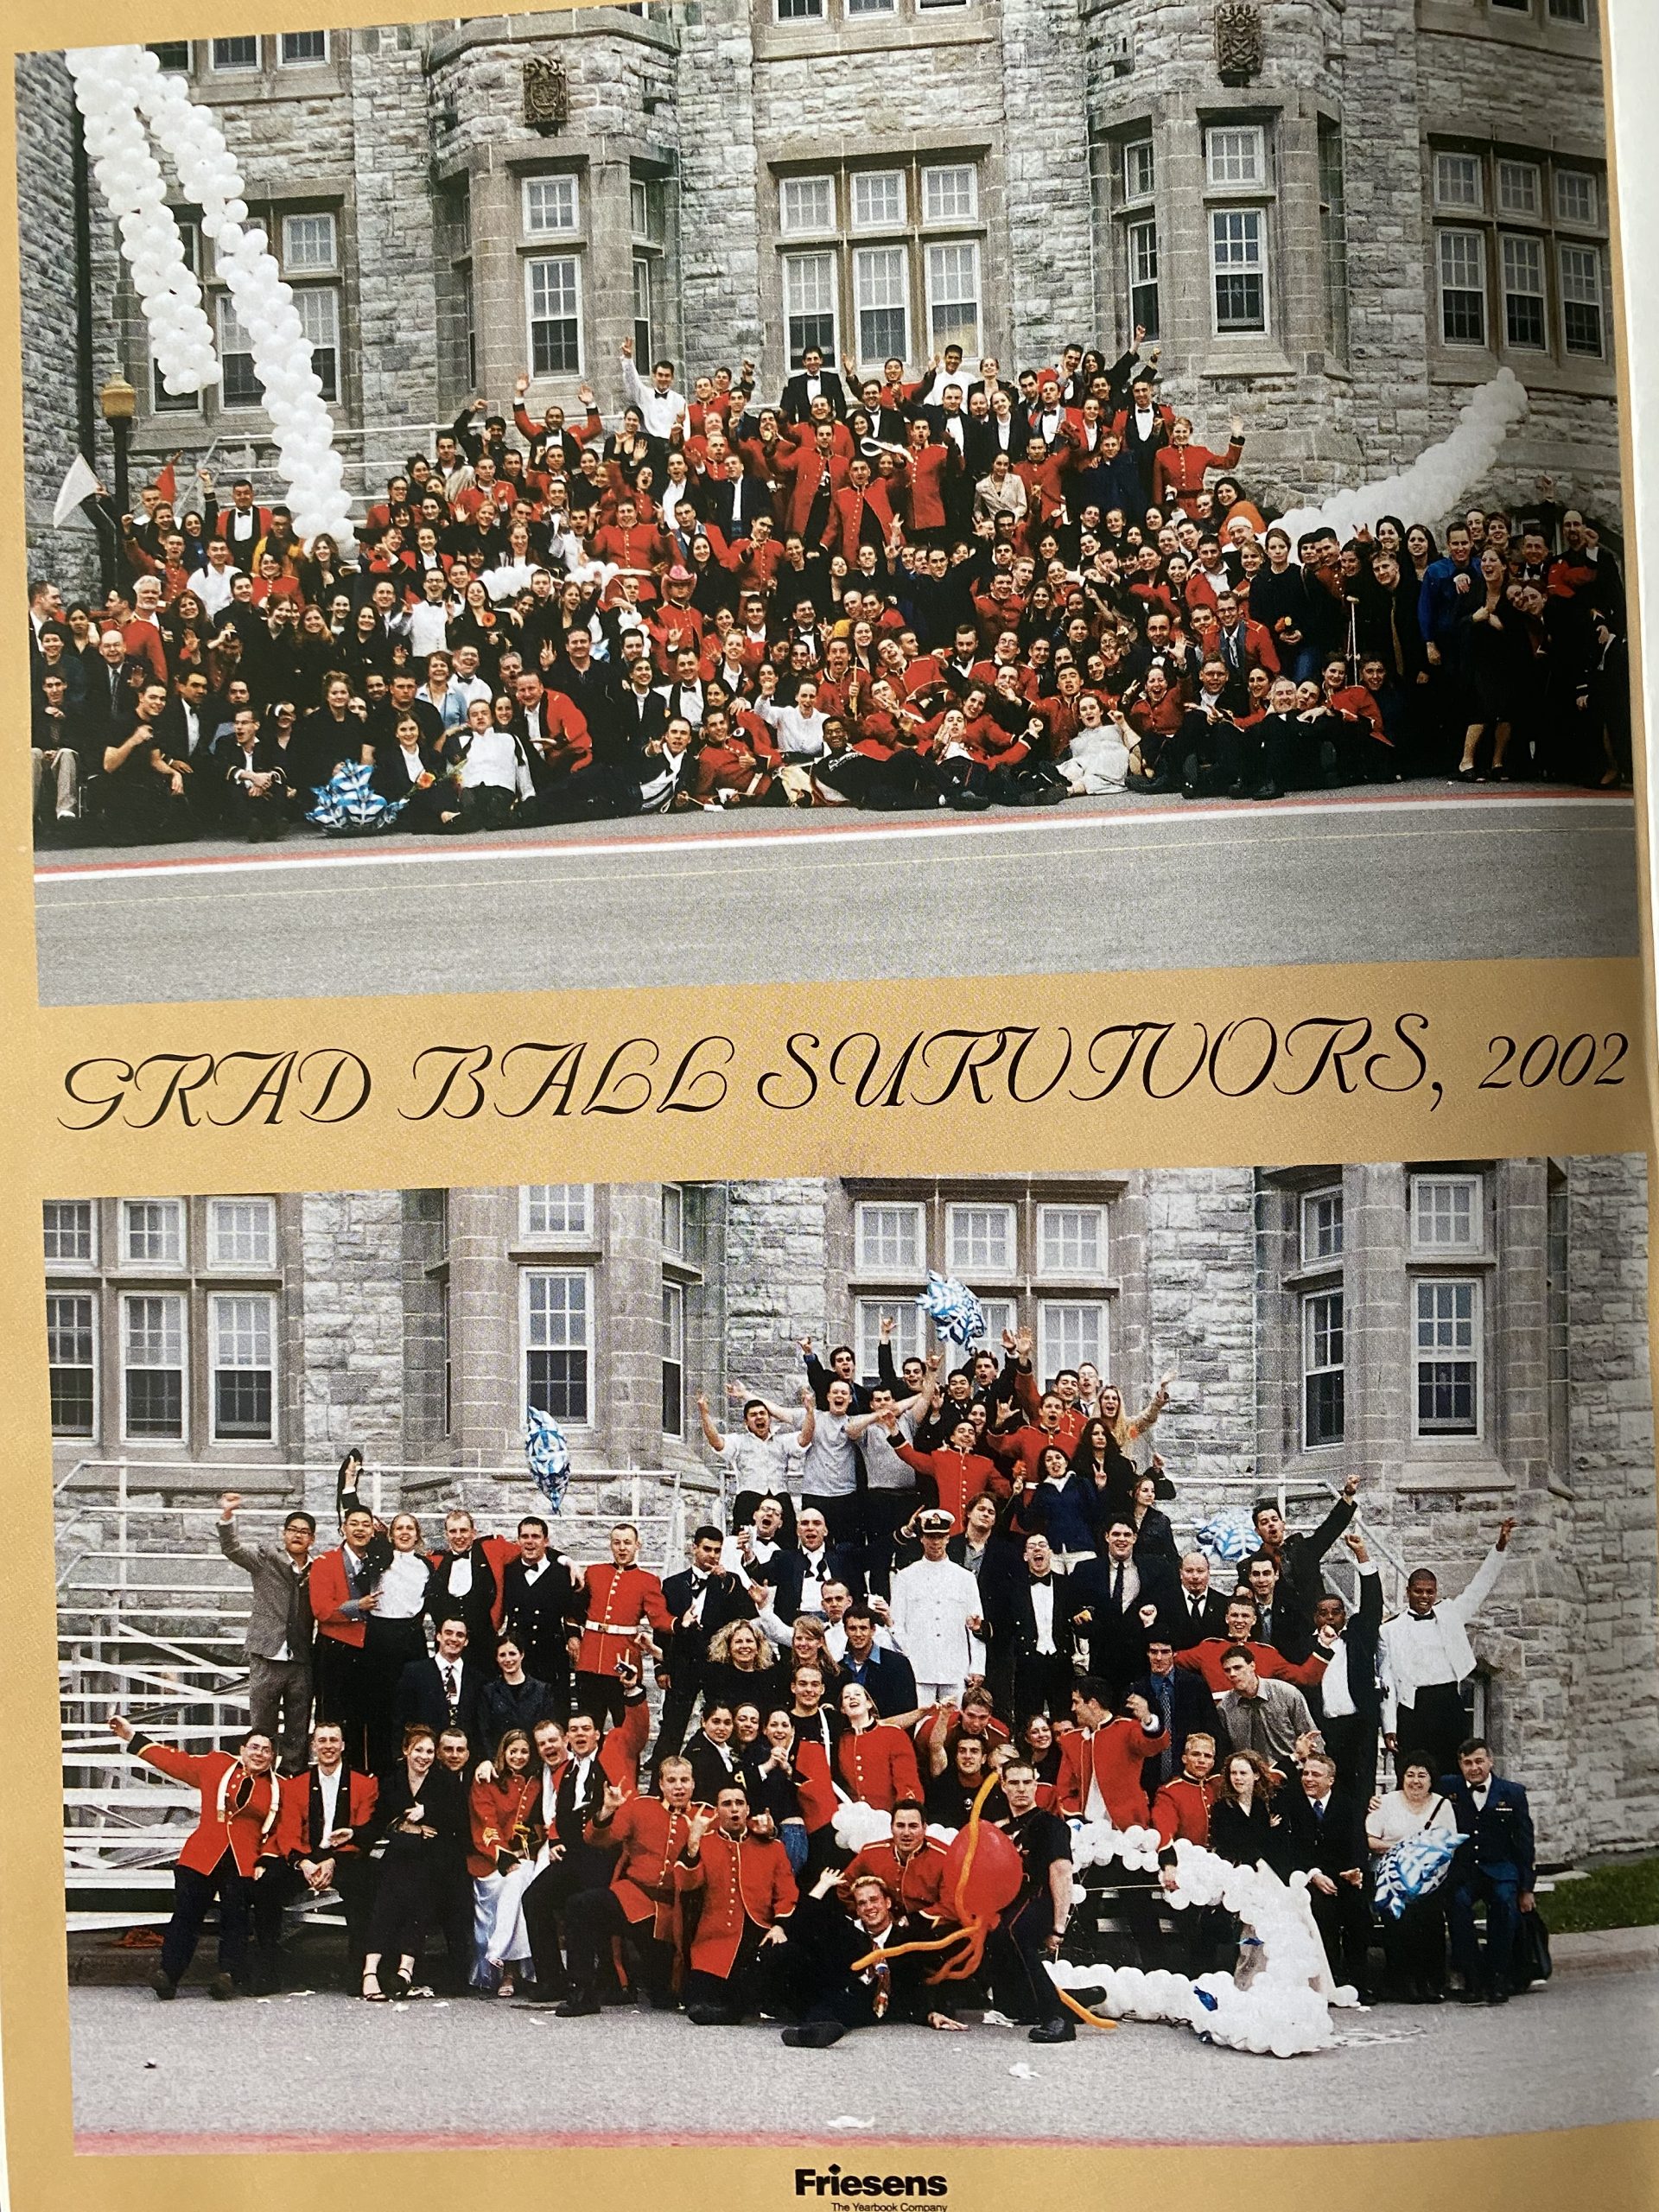 Two images - one before the RMC grad ball, and one featuring the "survivors" after